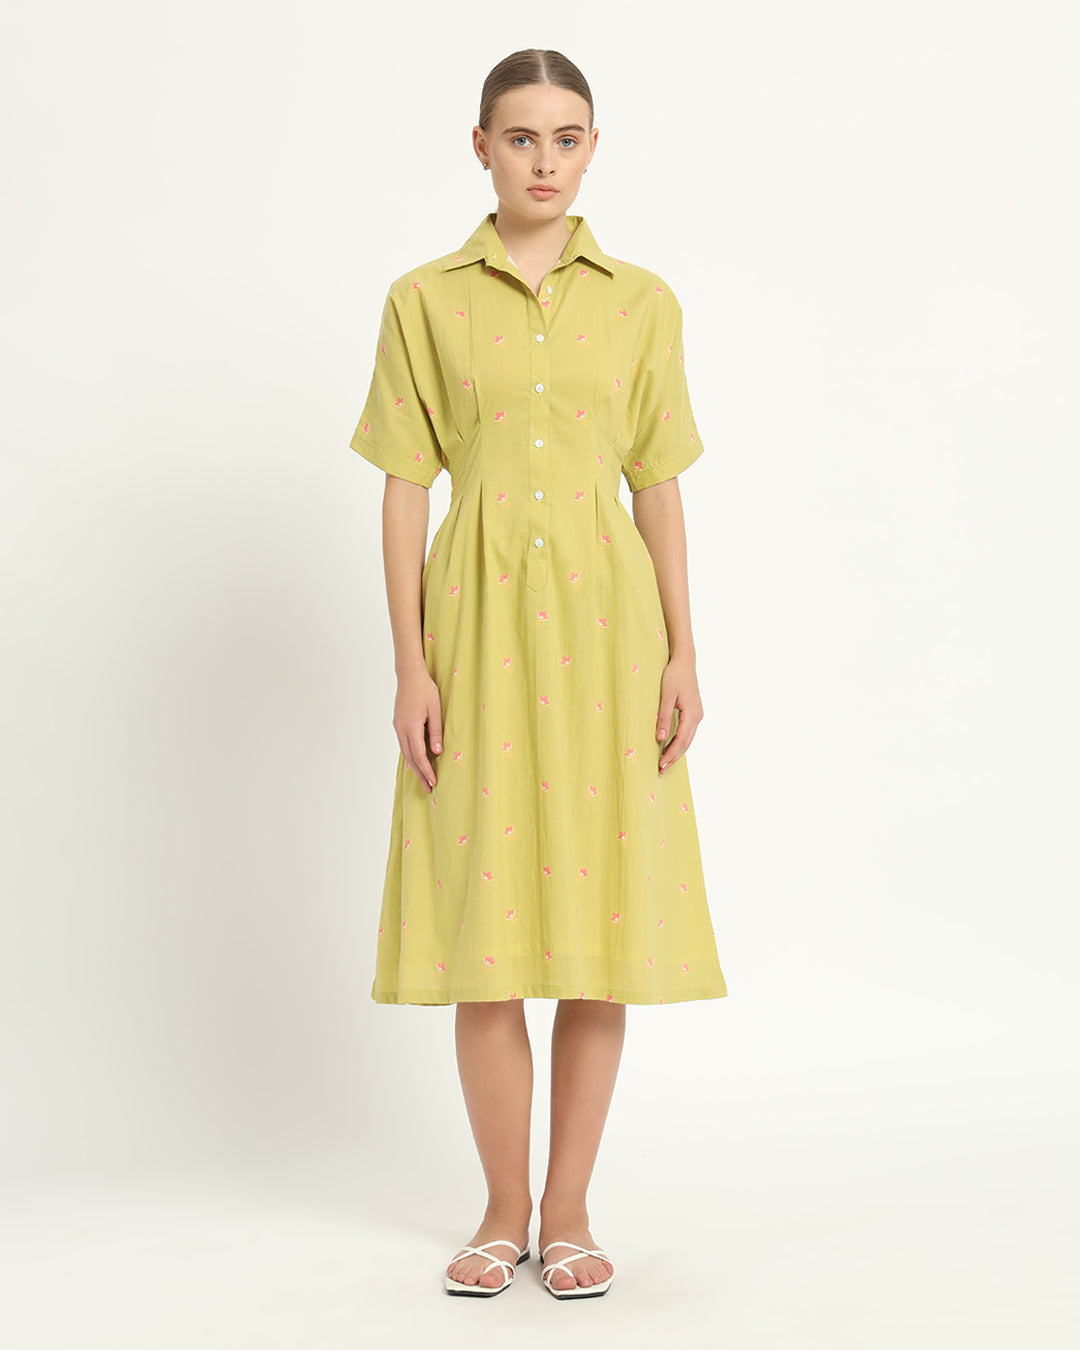 The Salford Lime Cosmos Dress